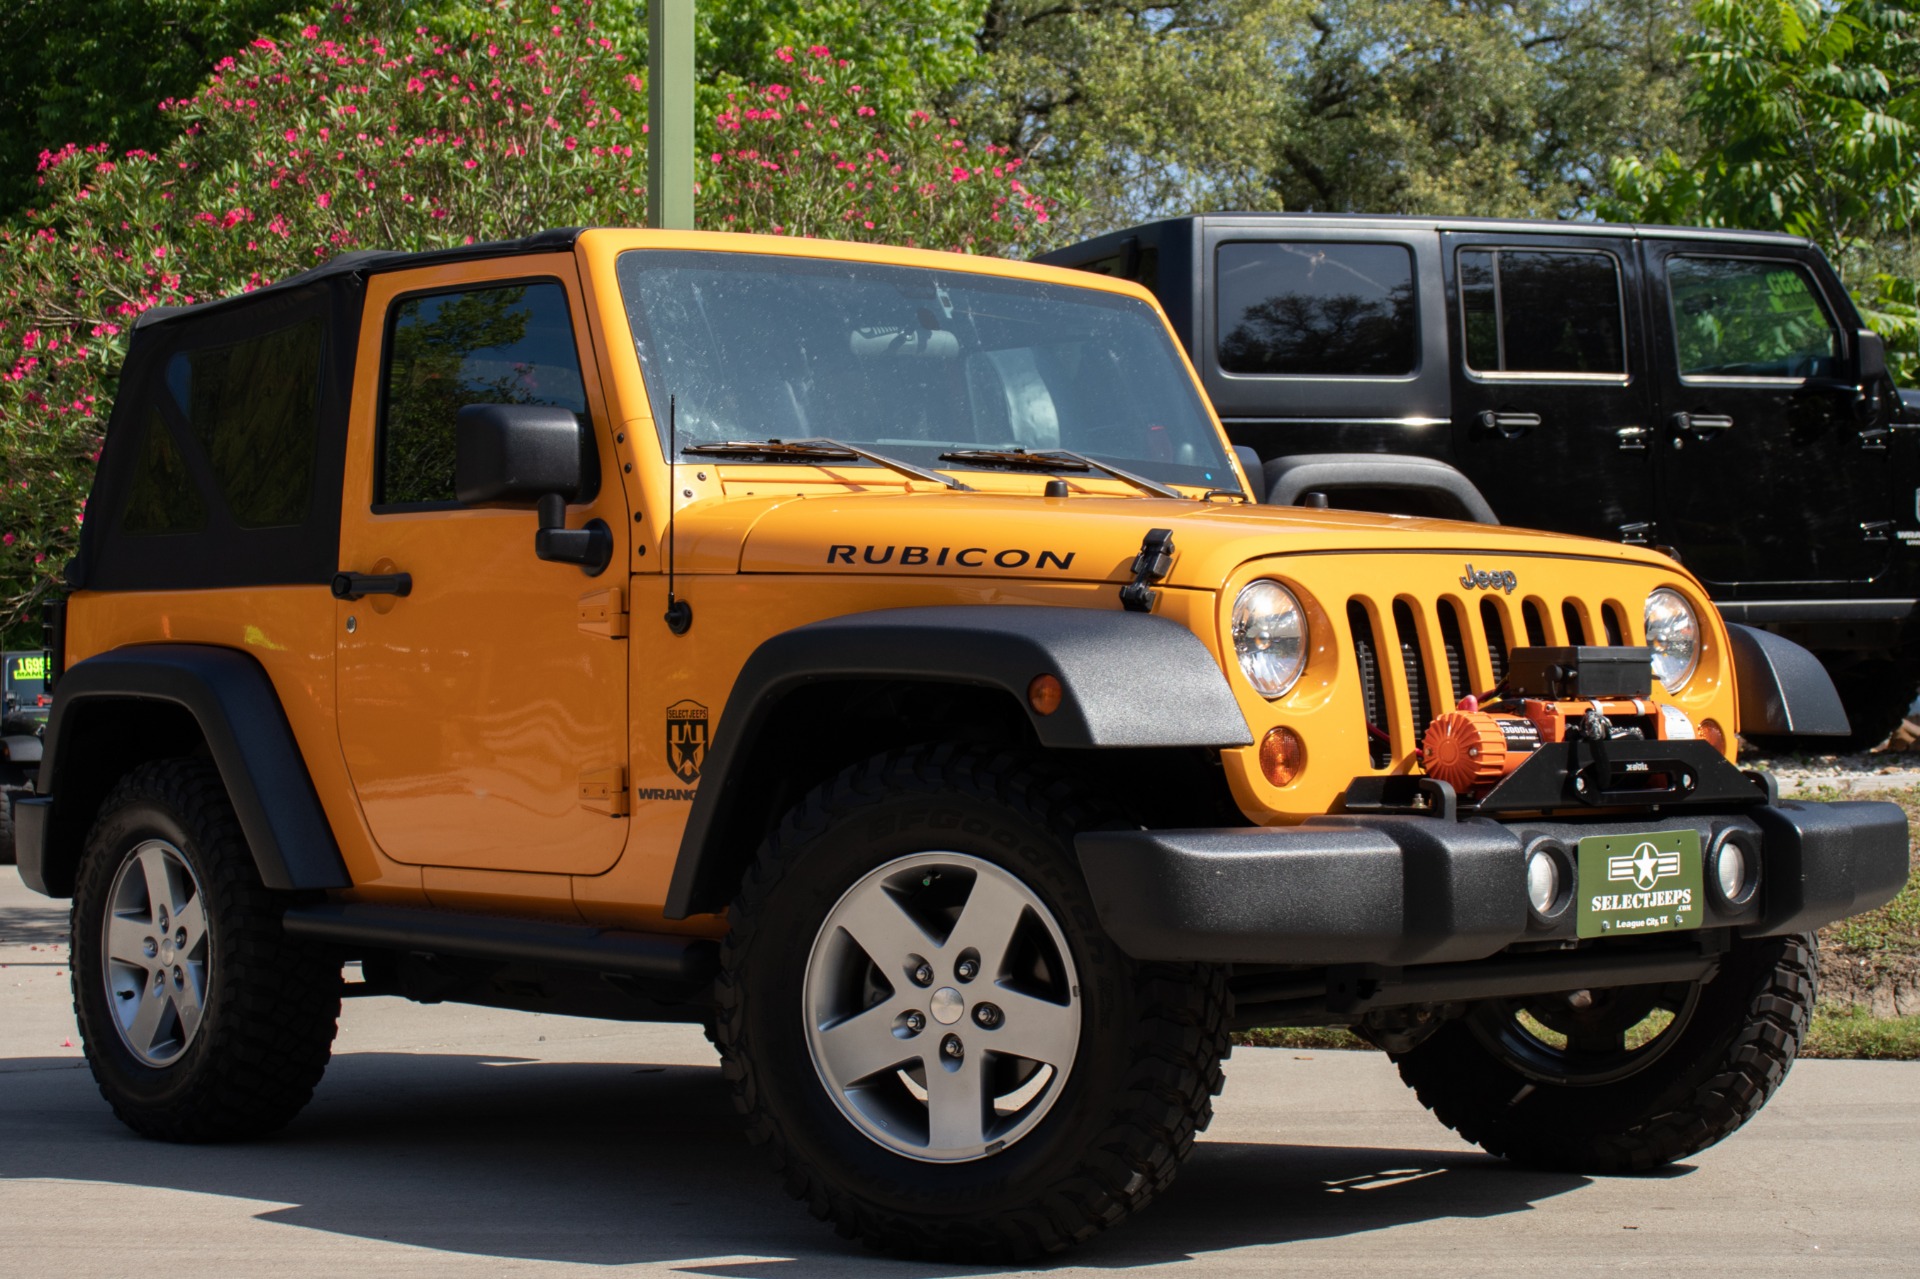 Used 2012 Jeep Wrangler Rubicon For Sale 24 995 Select Jeeps Inc 